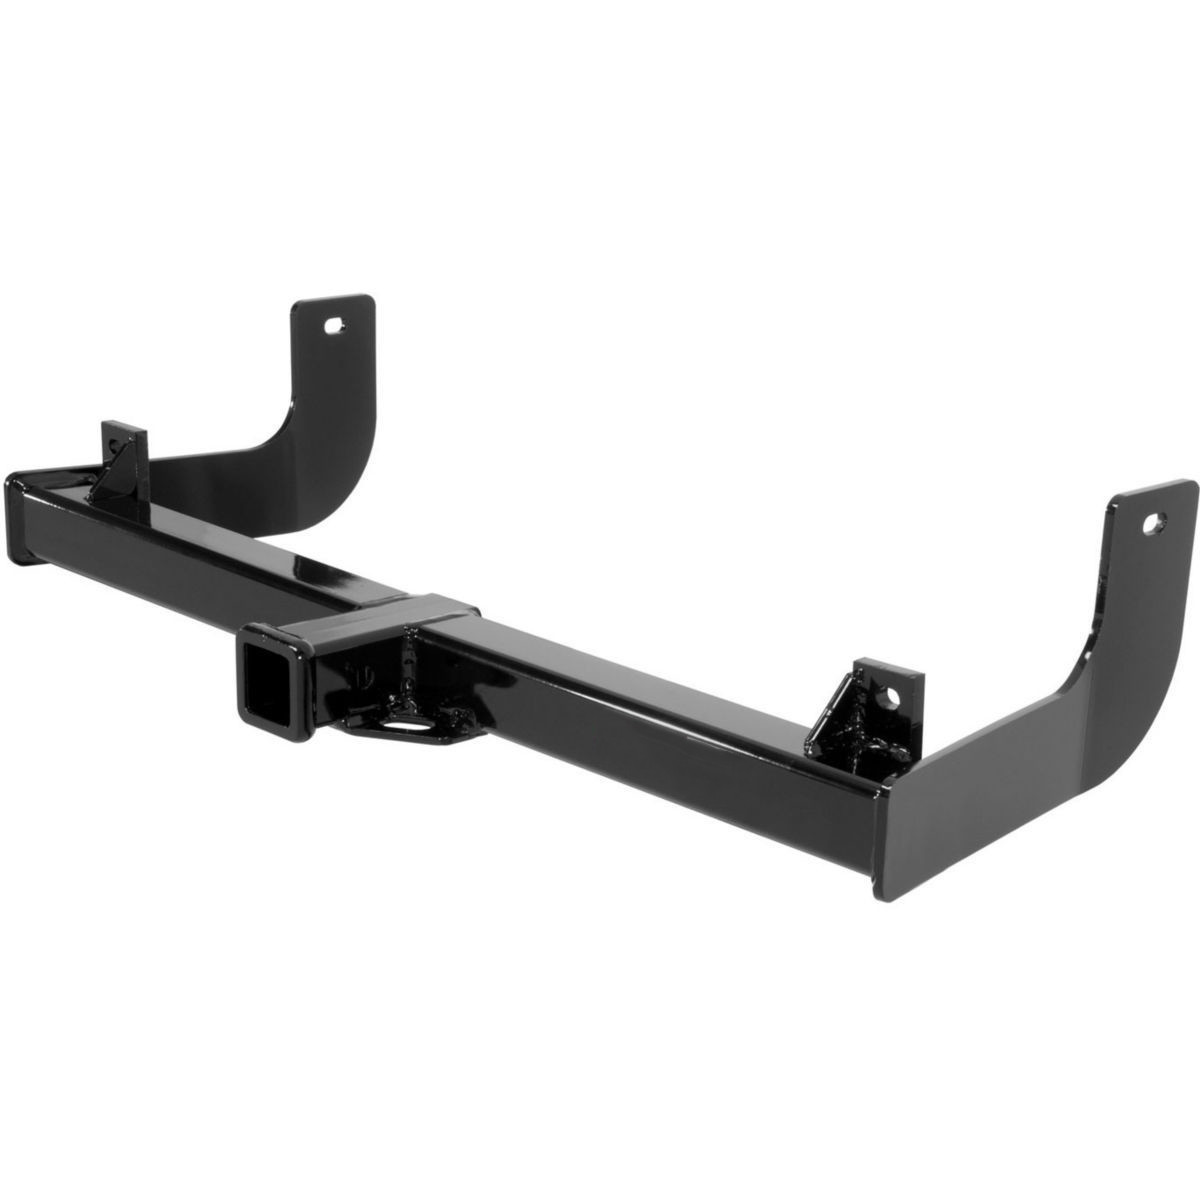 Steel Tow Bar Truck Hitch Receiver Black Color For Ford F150 2015 - 2018